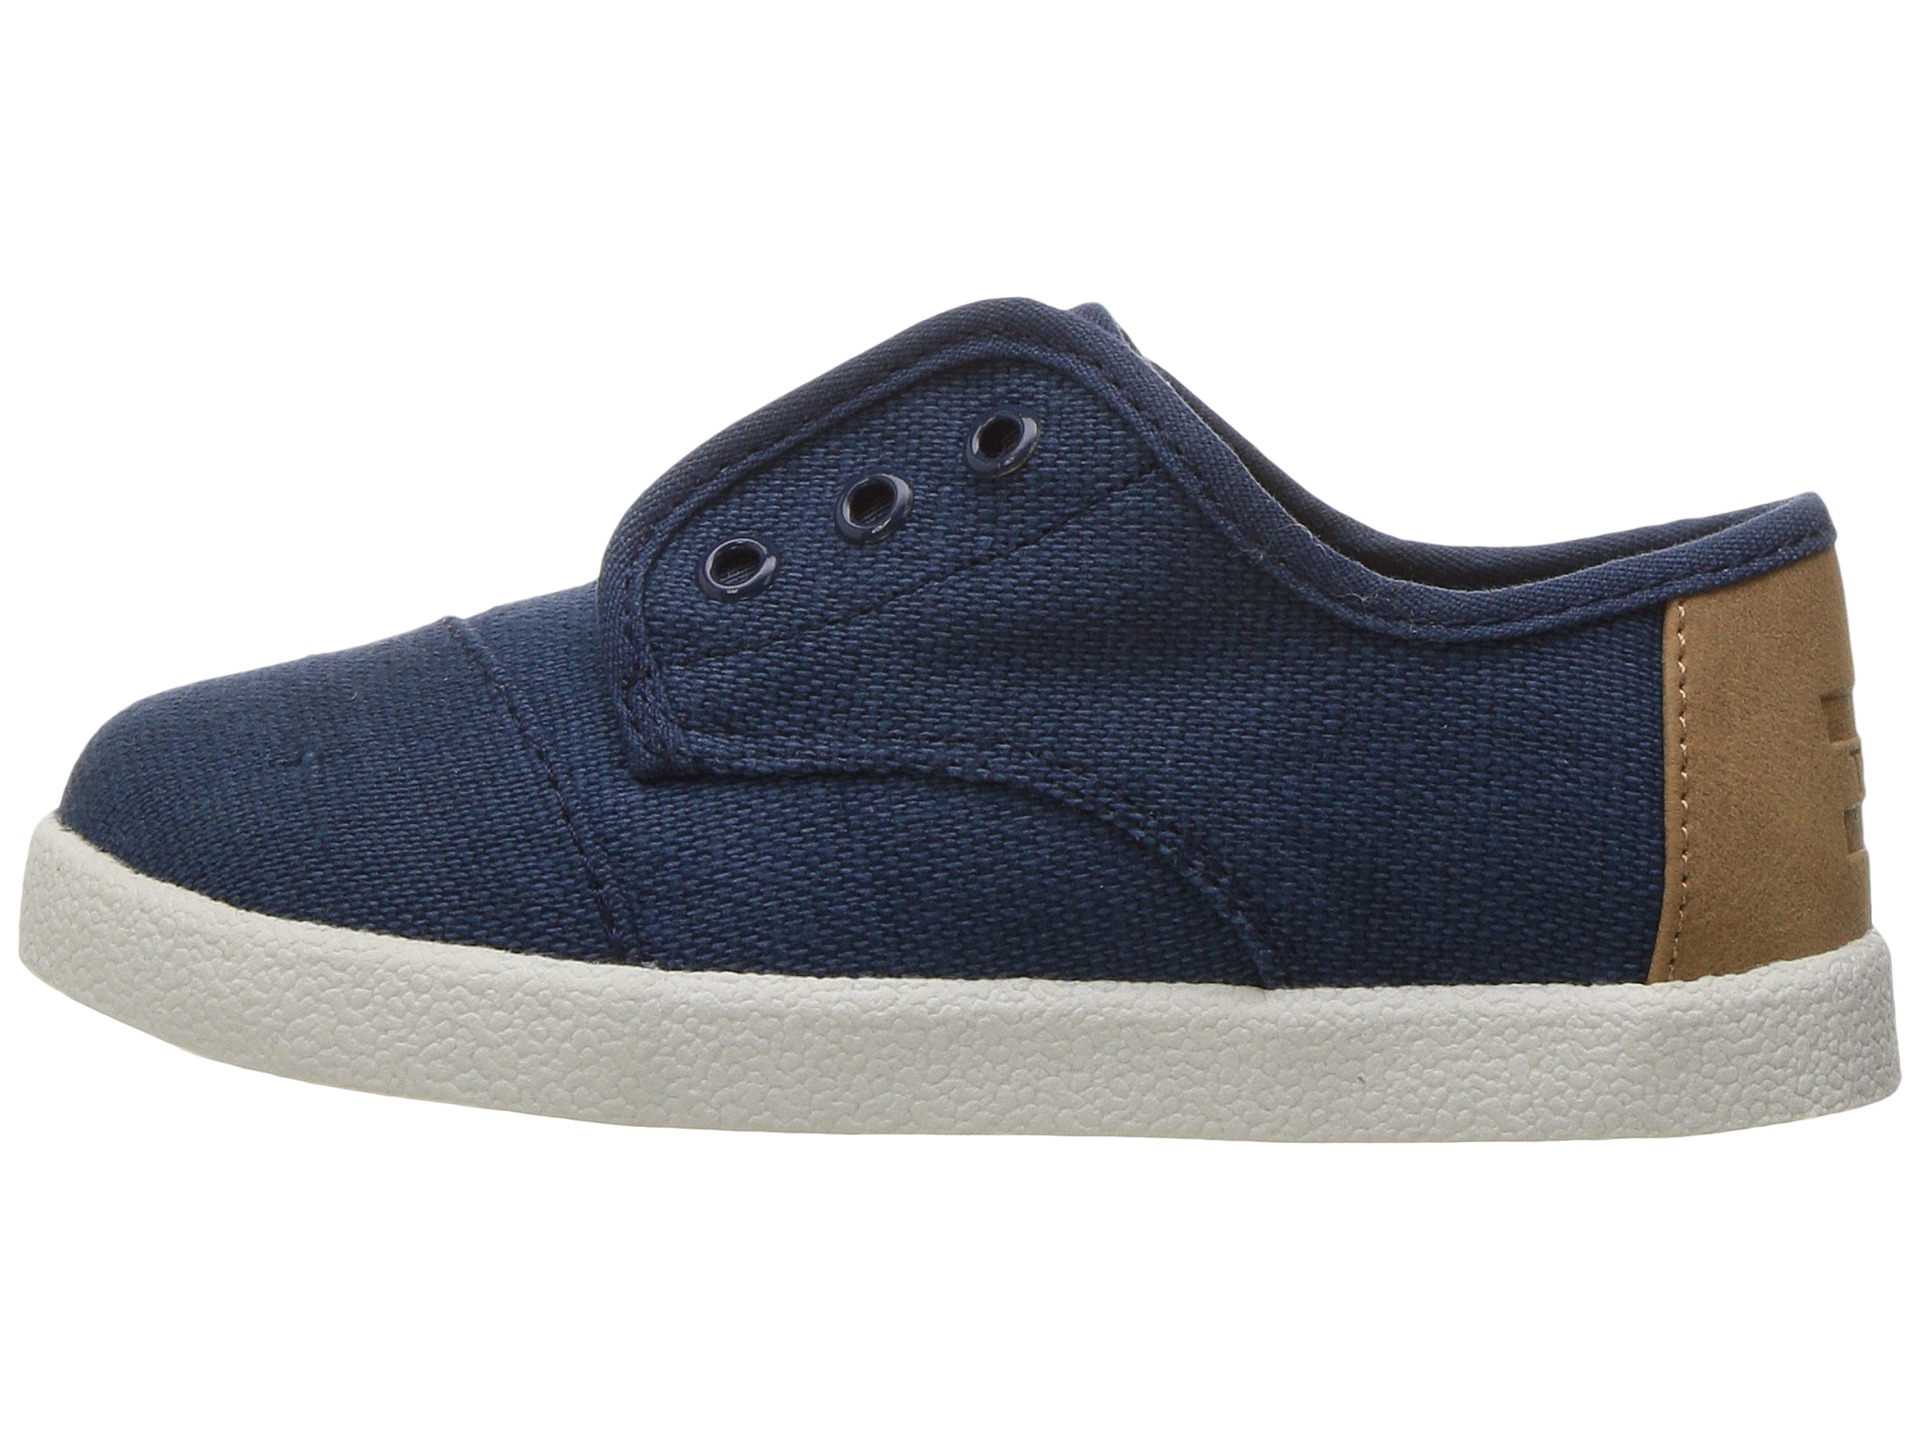 TOMS Kids Paseo Sneaker (Infant/Toddler/Little Kid) at Zappos.com